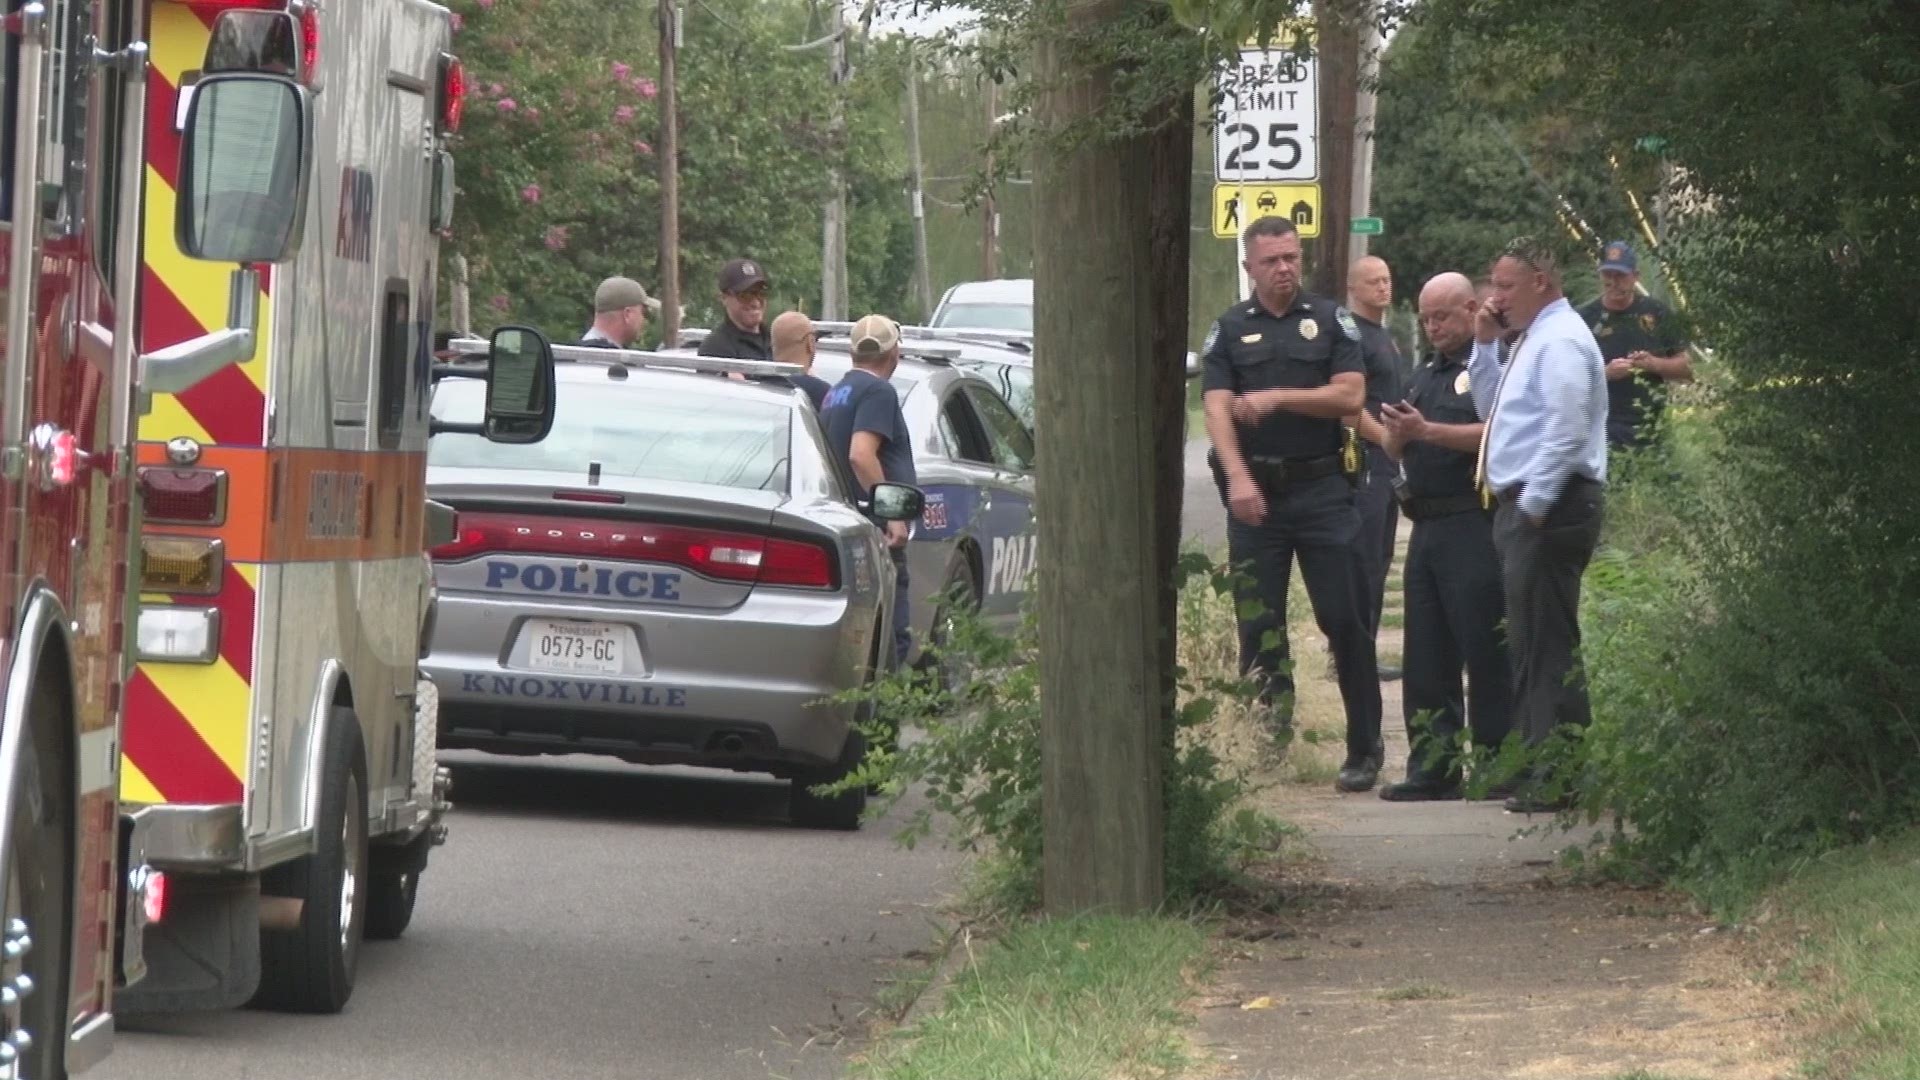 Investigators responded to the home around 12:19 p.m. after a call for shots fired in the area, KPD communications manager Scott Erland said.